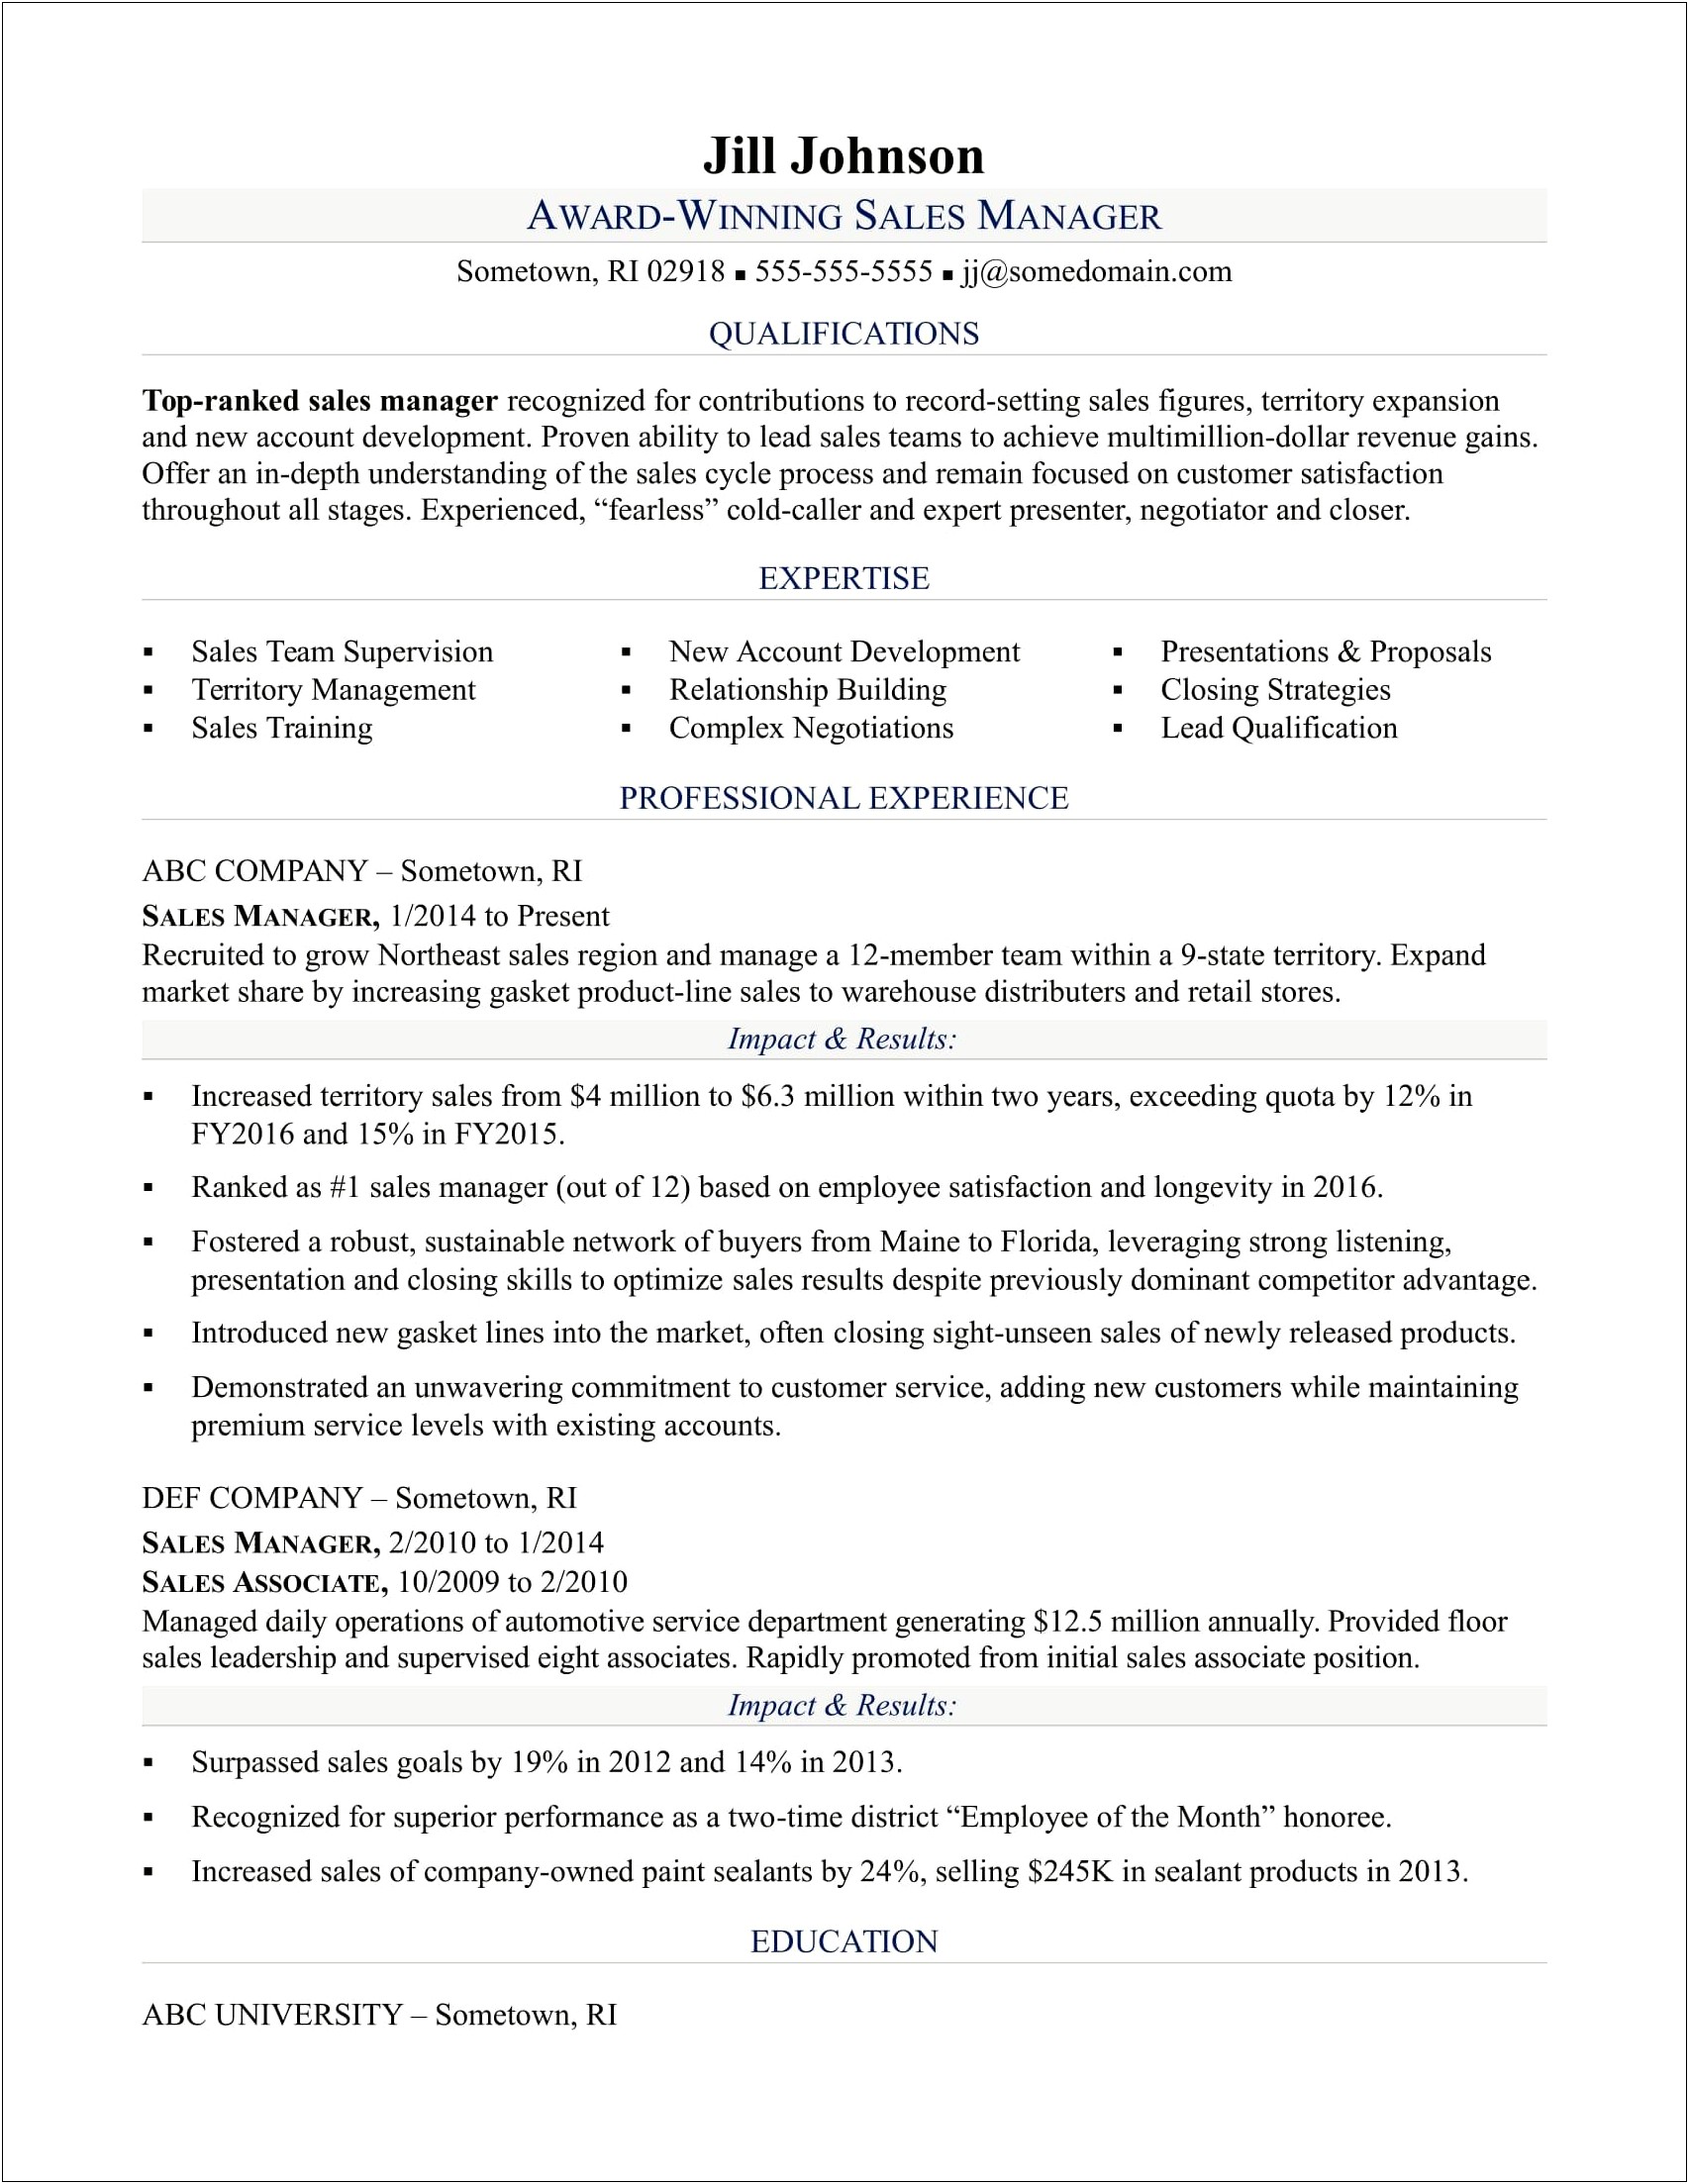 Resume Summary For Proposal Manager